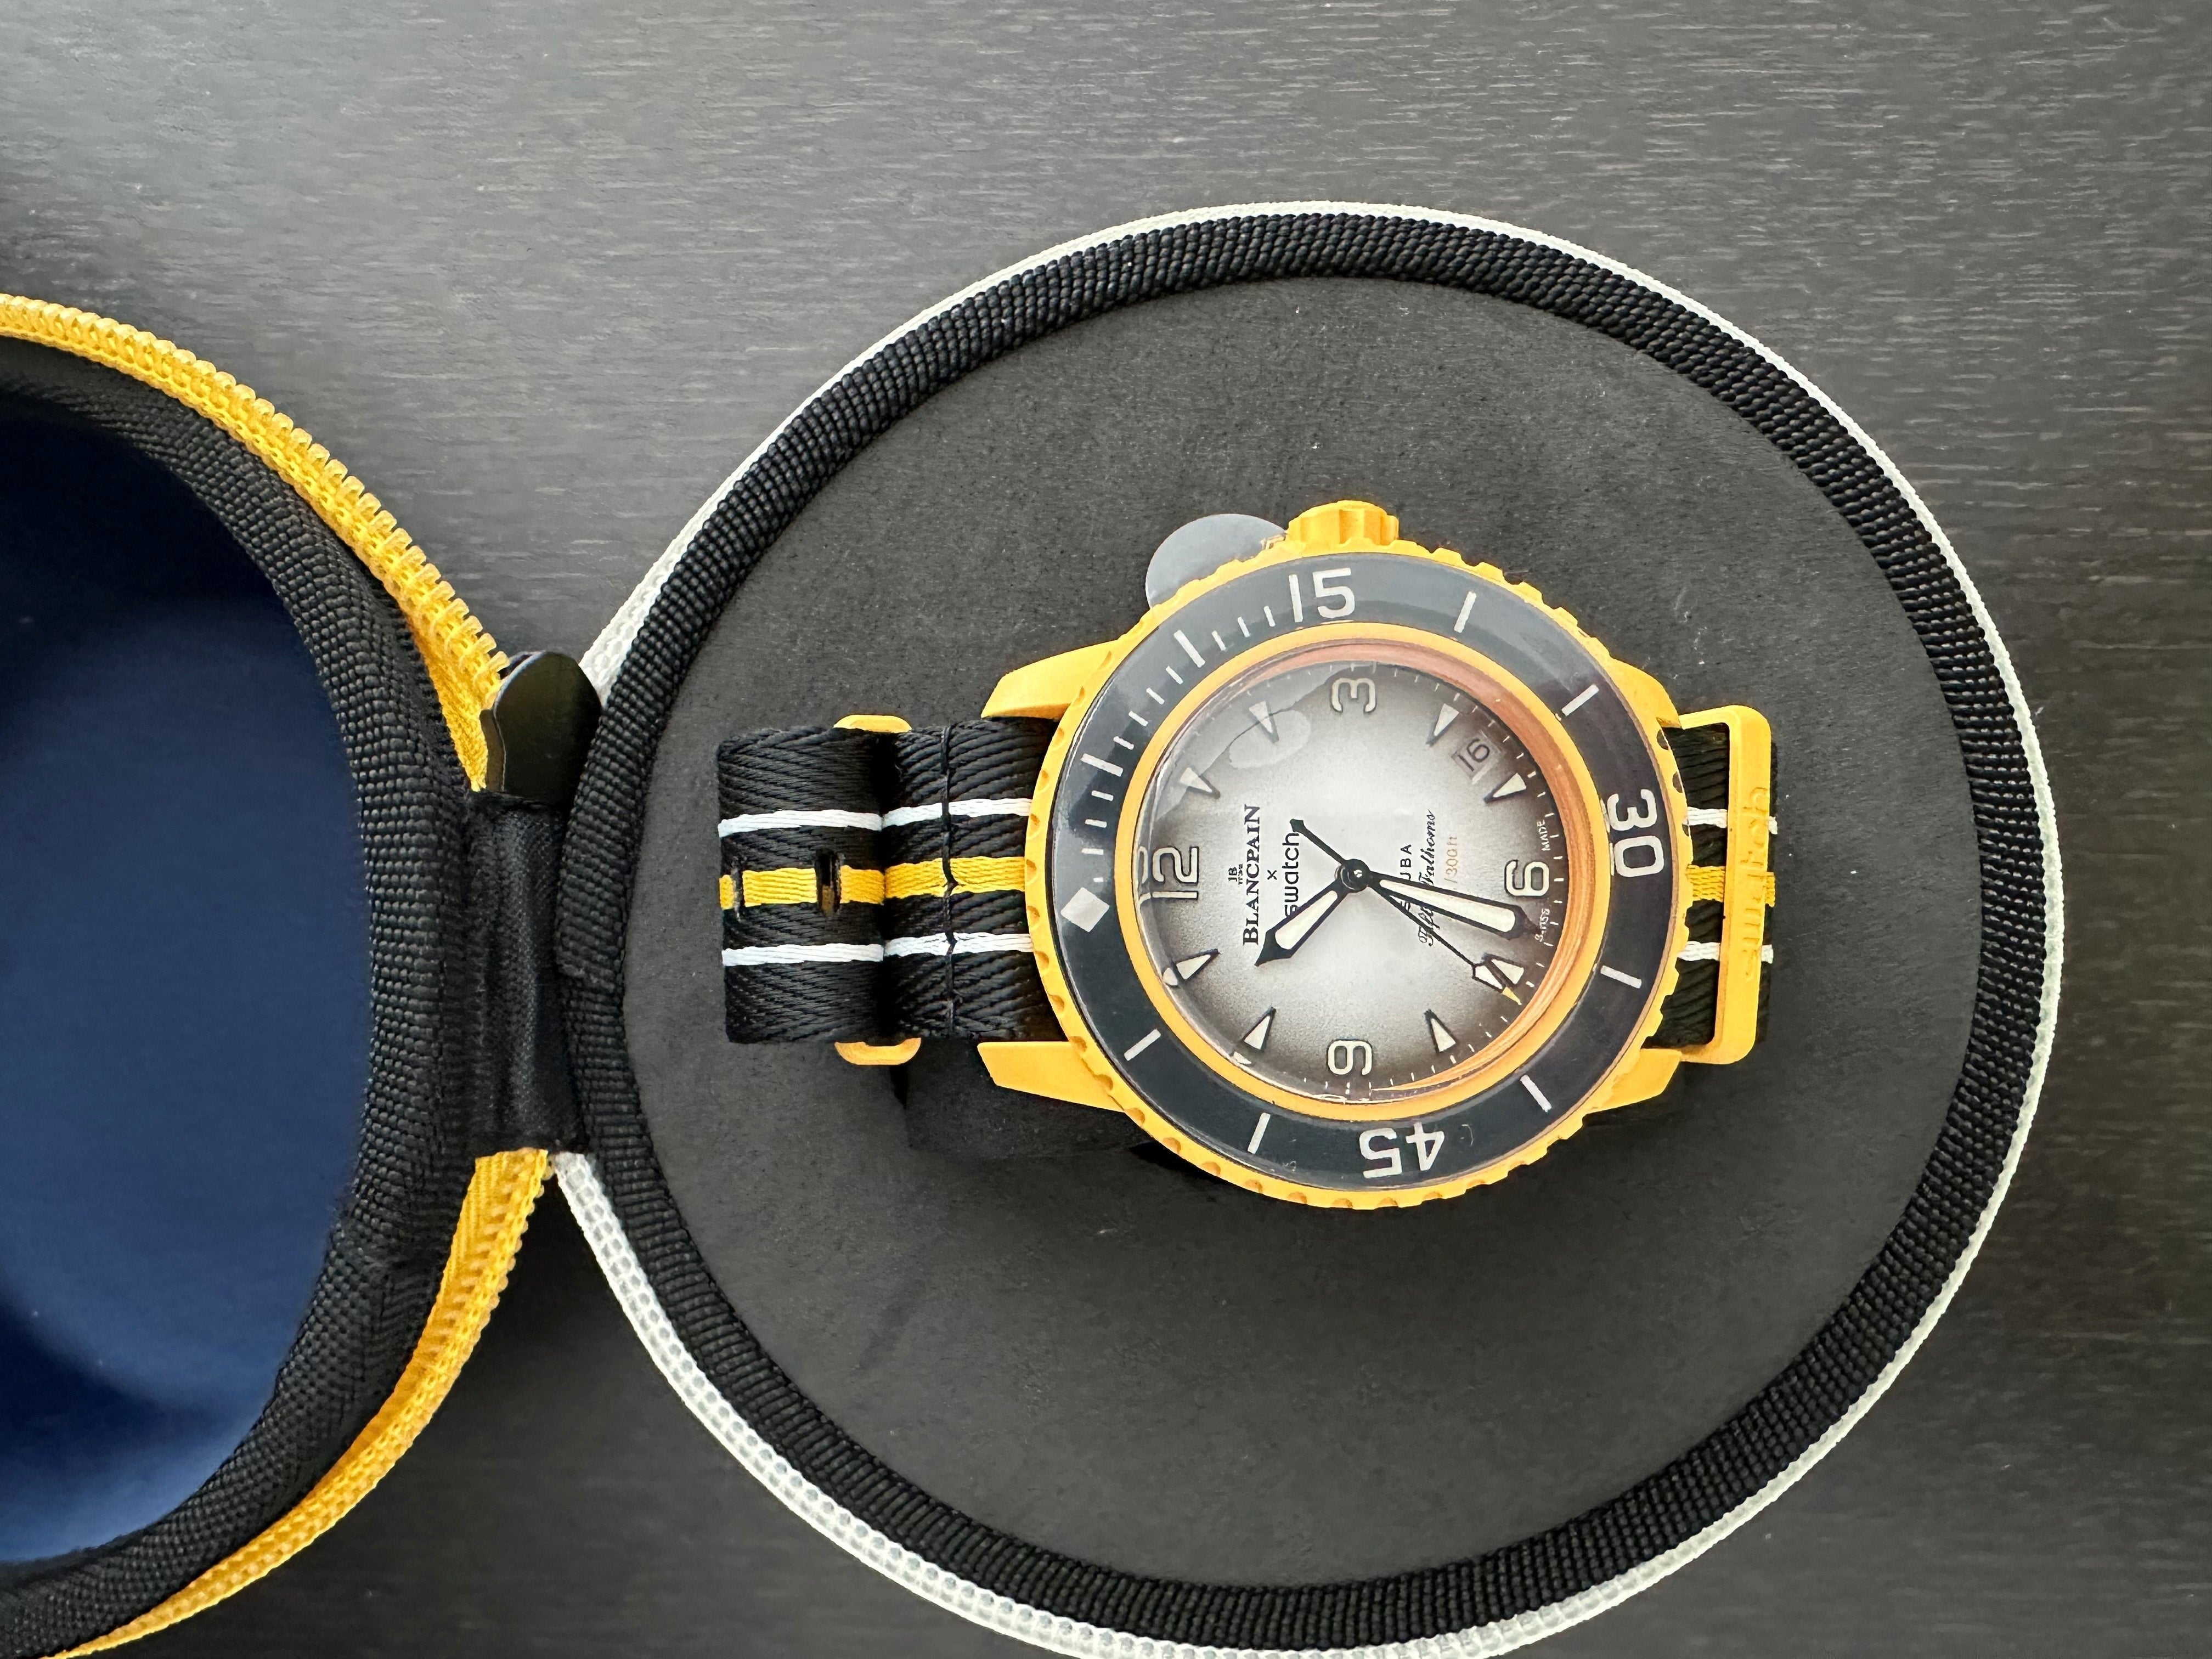 Swatch Blancpain Scuba Fifty Fathoms Pacific Ocean Yellow 42 SO35P100